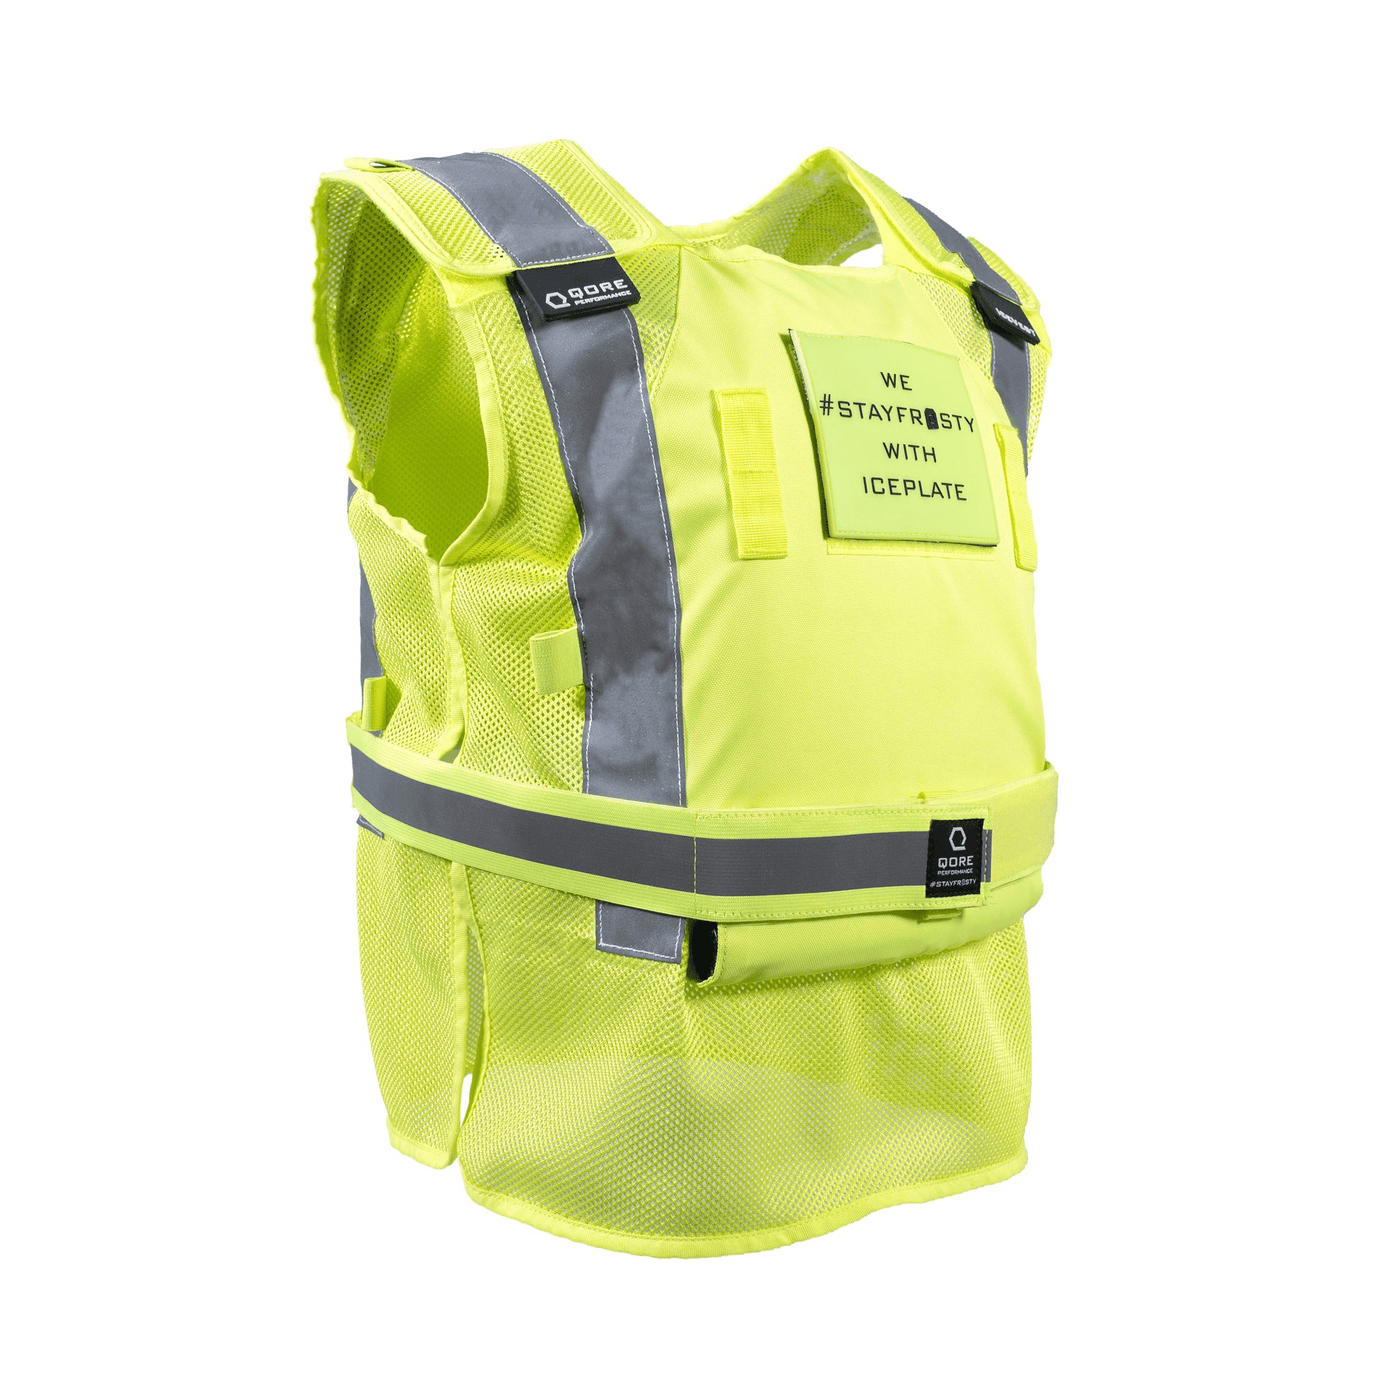 Class 2 Safety Vest | Safety Cooling Vests No ICEPLATES / Extended (45+) / Domestic